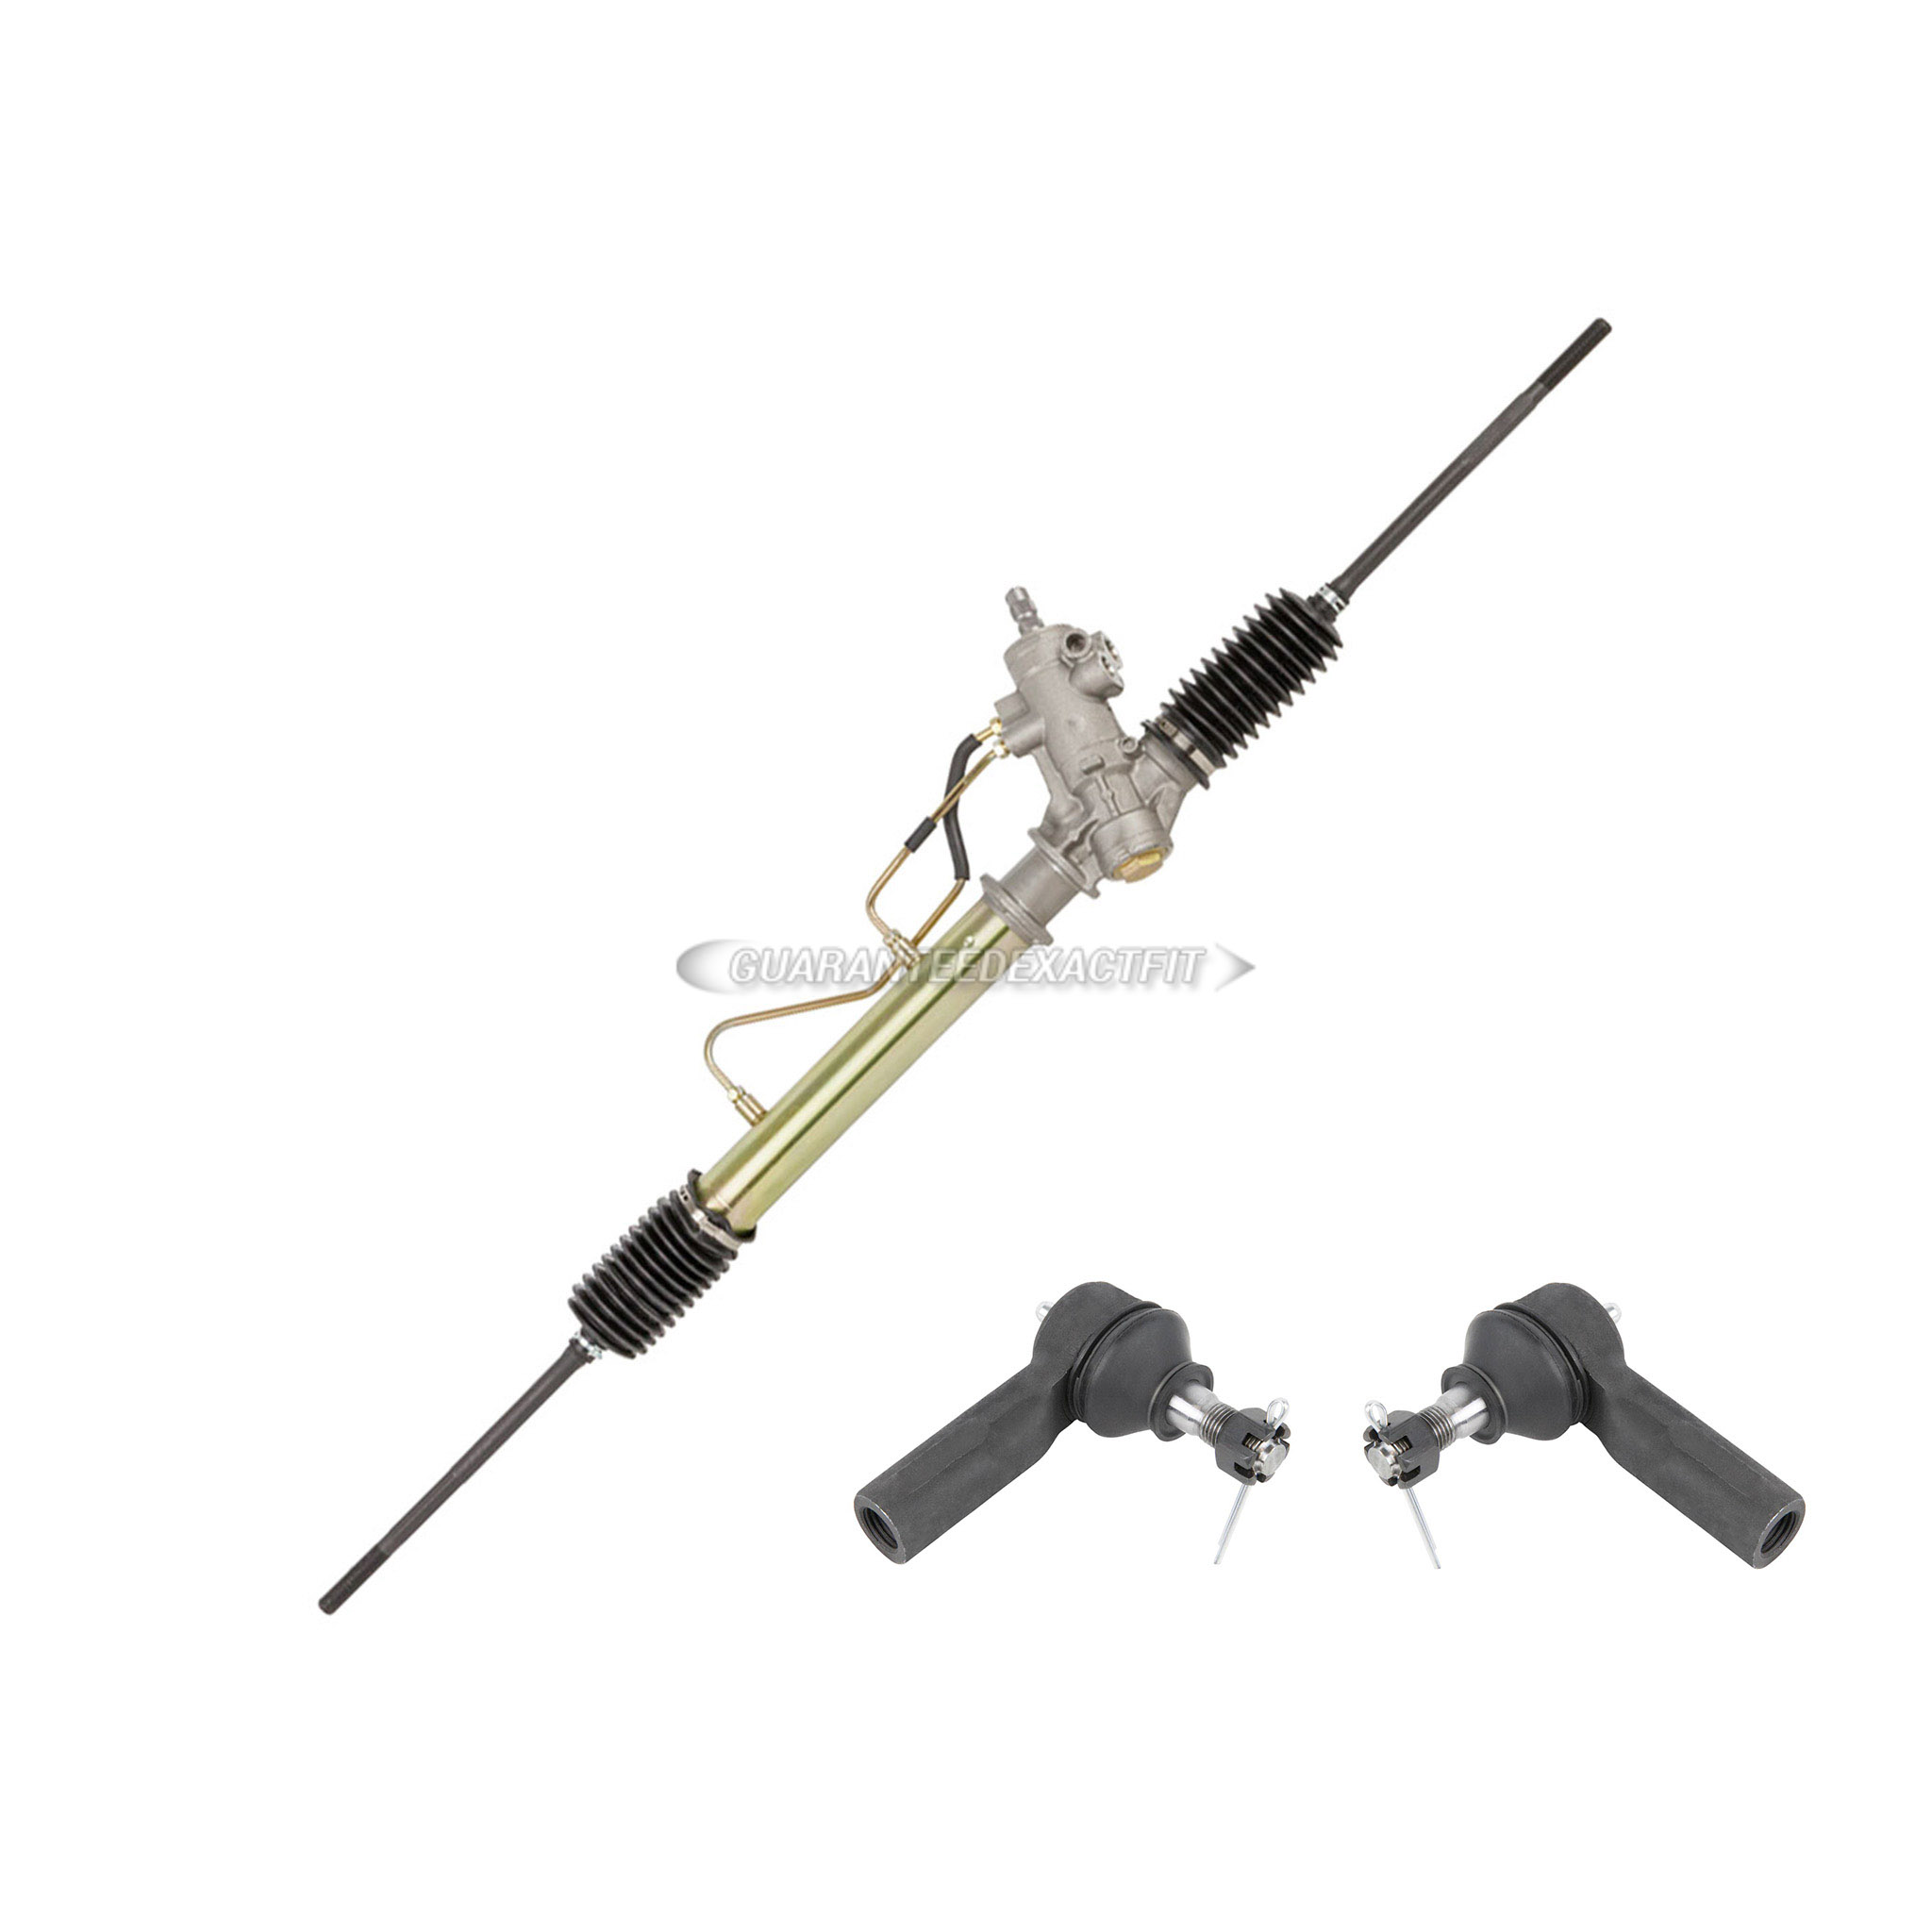  Geo prizm rack and pinion and outer tie rod kit 